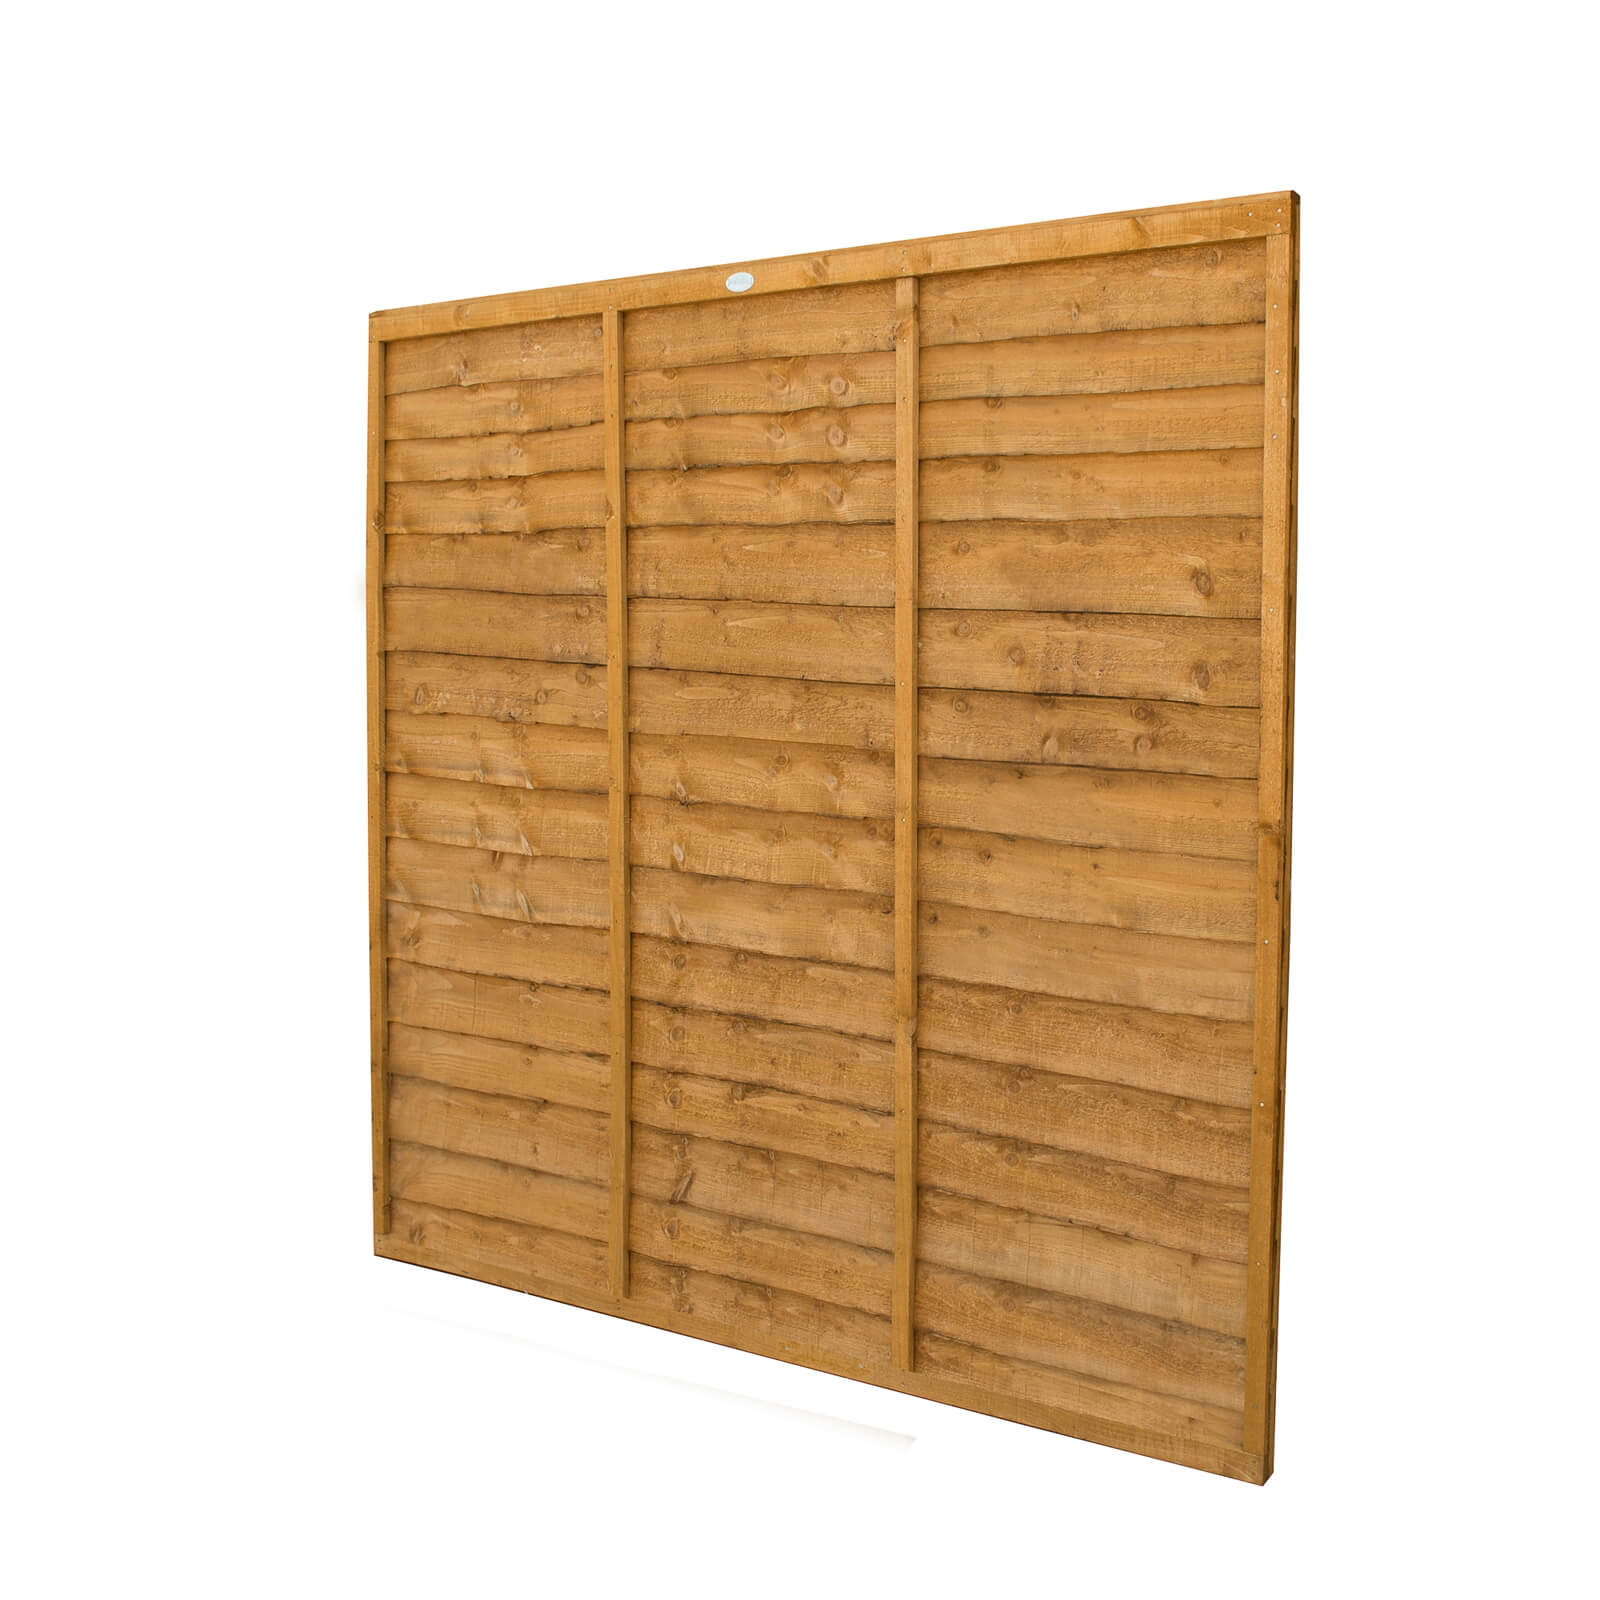 Forest Larchlap Lap 6x6ft Fence Panel - Pack of 3